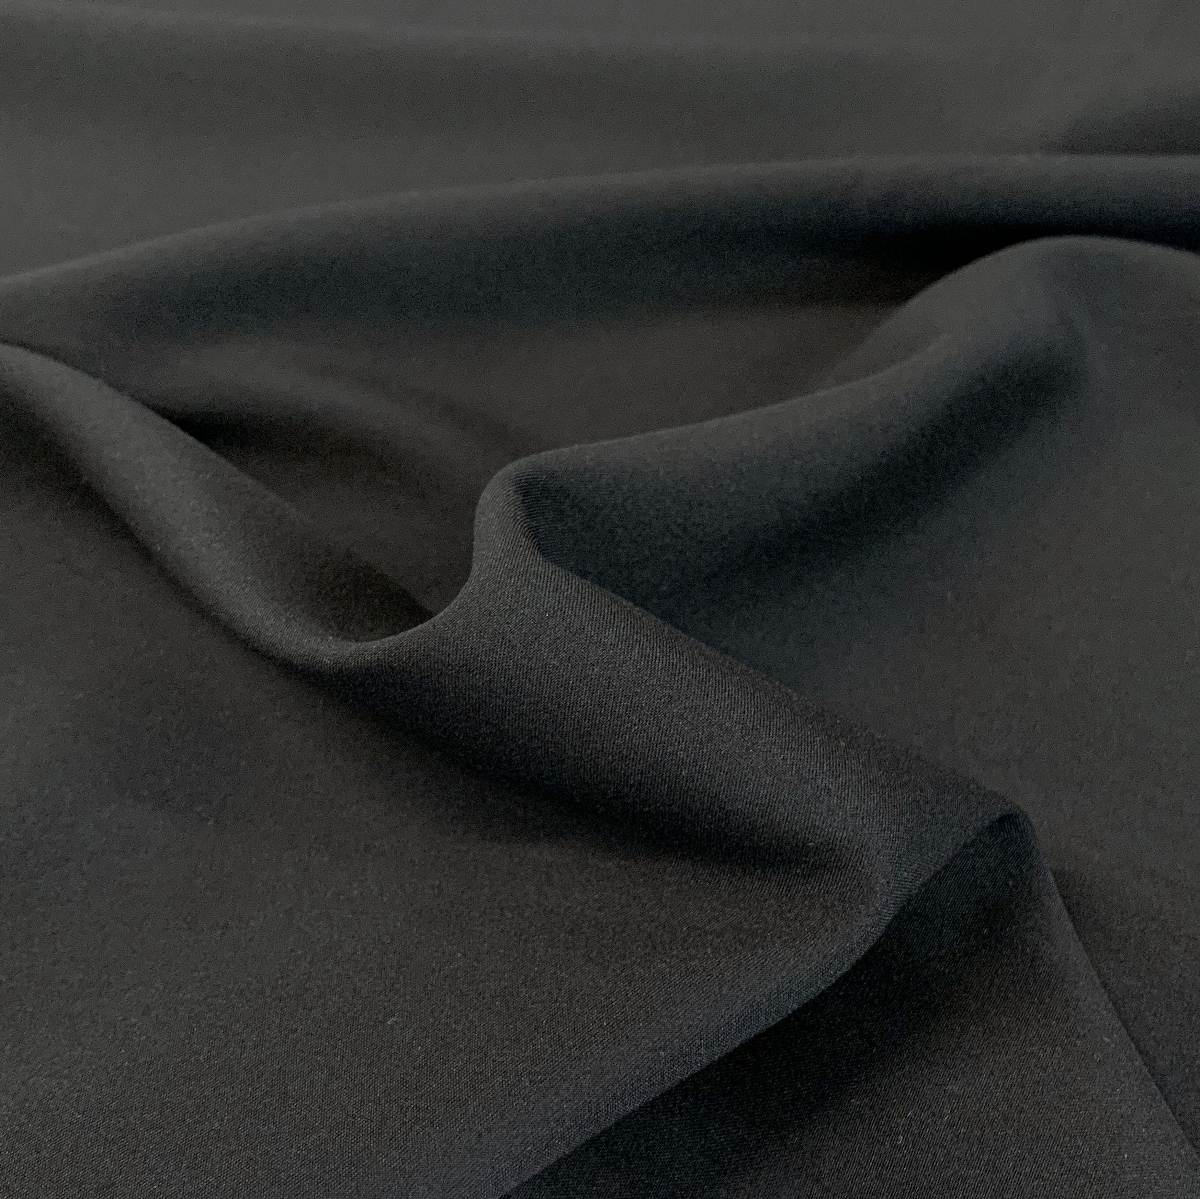 https://www.croftmill.co.uk/images/pictures/2-2021/07-july-2021/woven-stretch-lining-black-fold-2.jpg?v=2cd42817